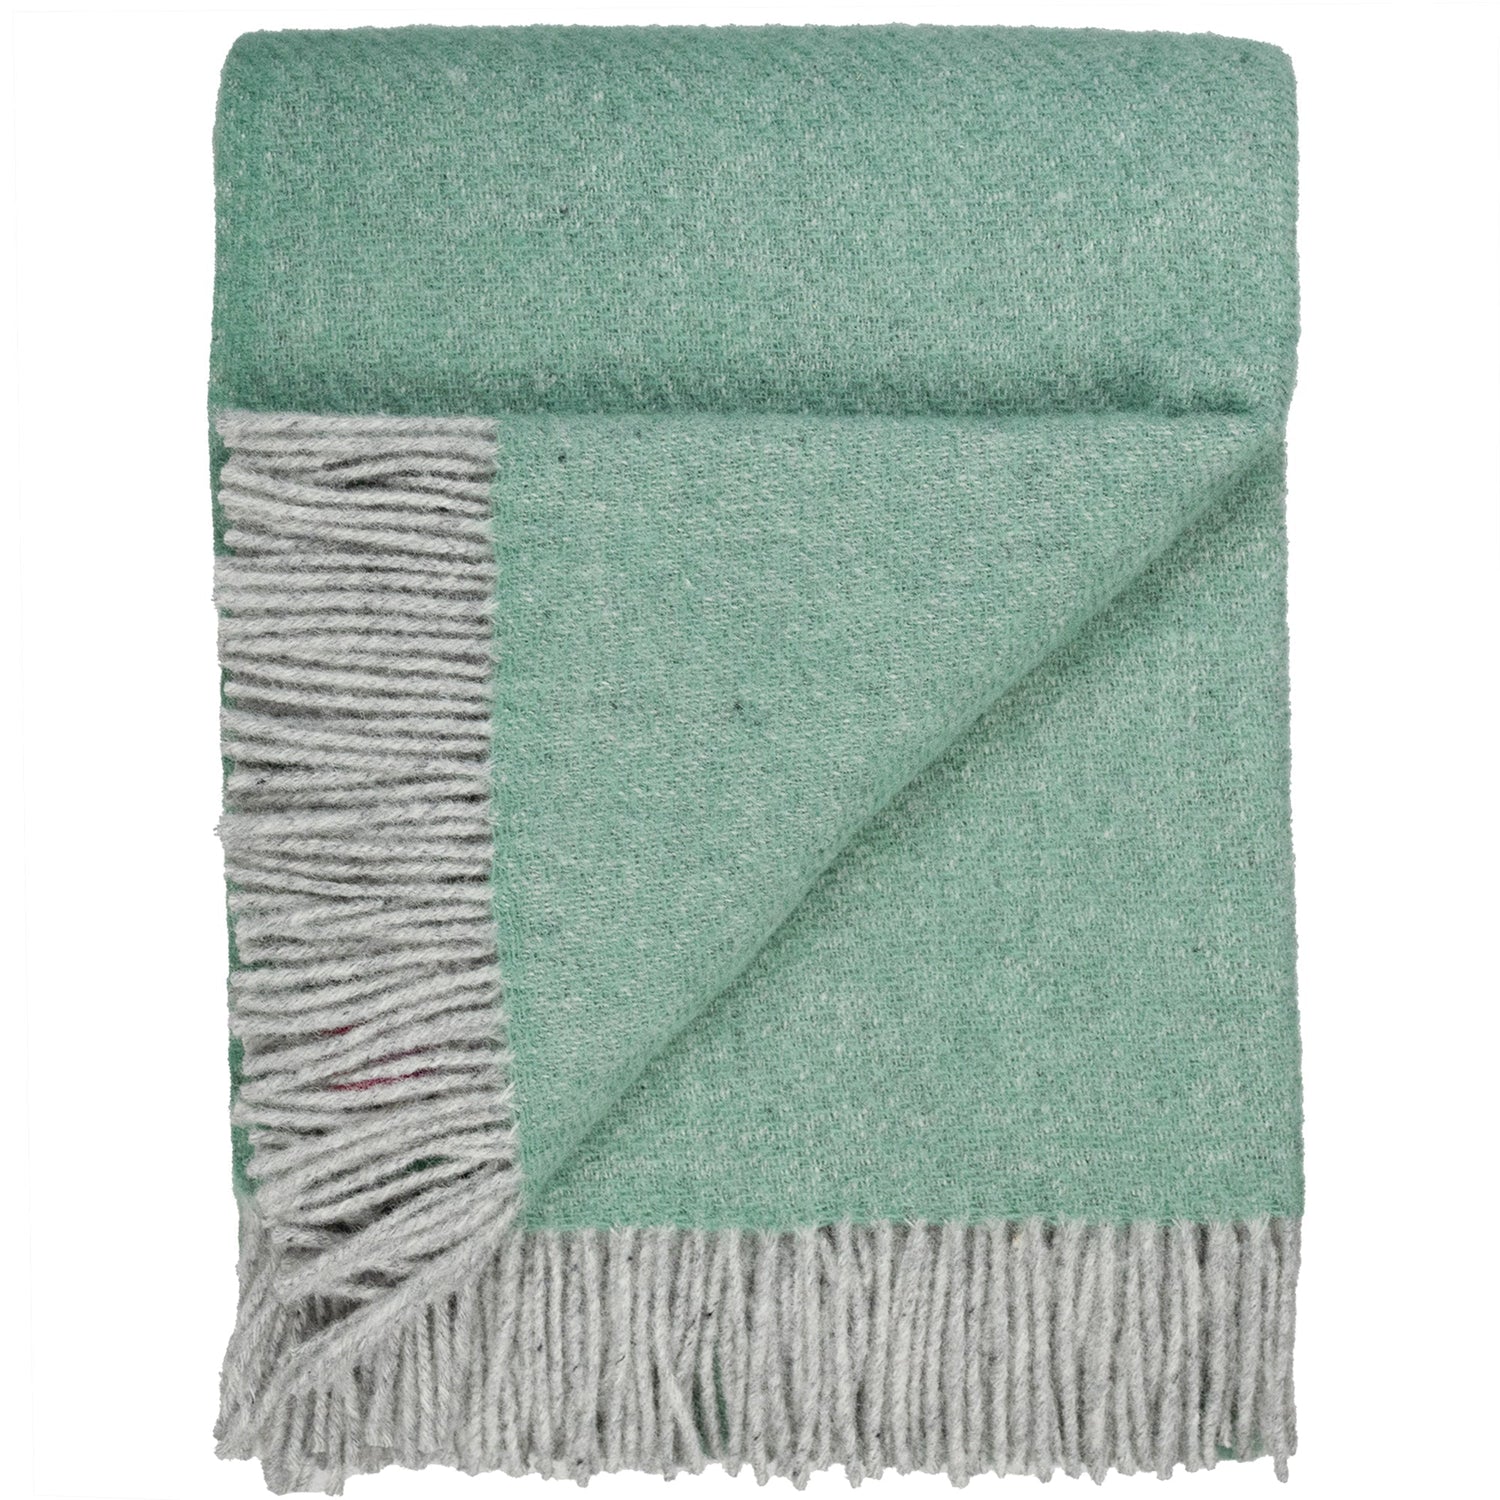 Southampton Home Wool Twill Throw Blanket (Seafoam Green)-Throws and Blankets-810032752422-SHWoolTwillGreen-Prince of Scots